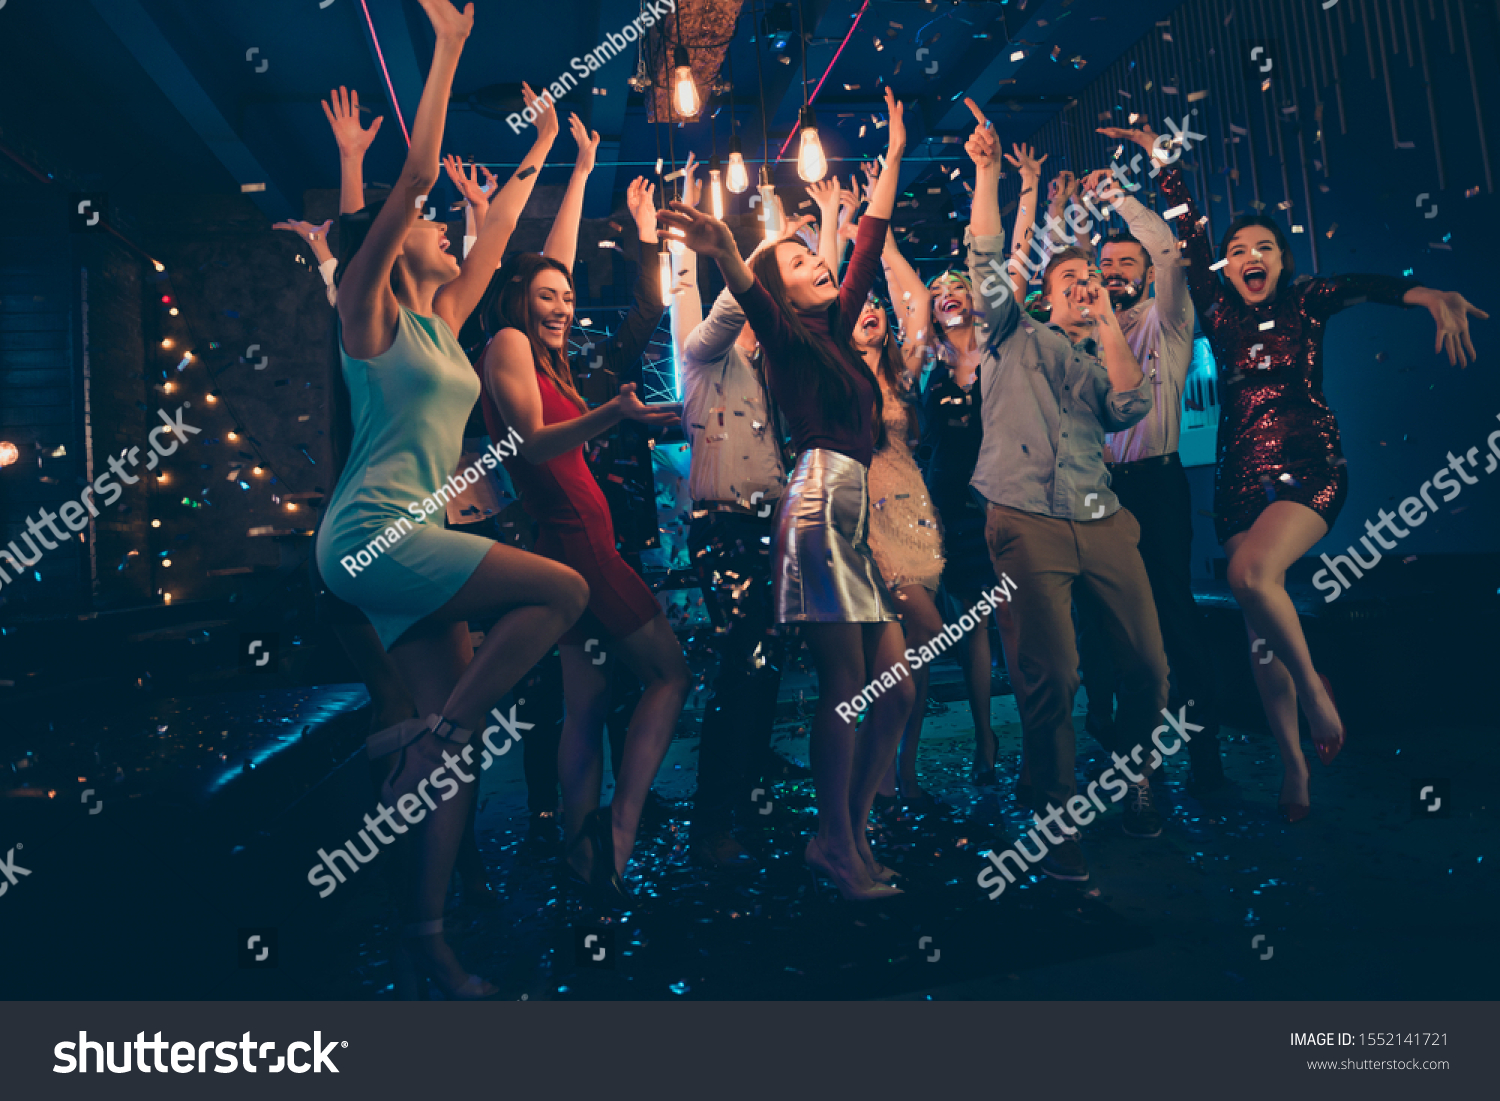 Full length body size photo of company dancing cheerfully at night club under falling confetti and light of shining lamps with smiles on their faces #1552141721